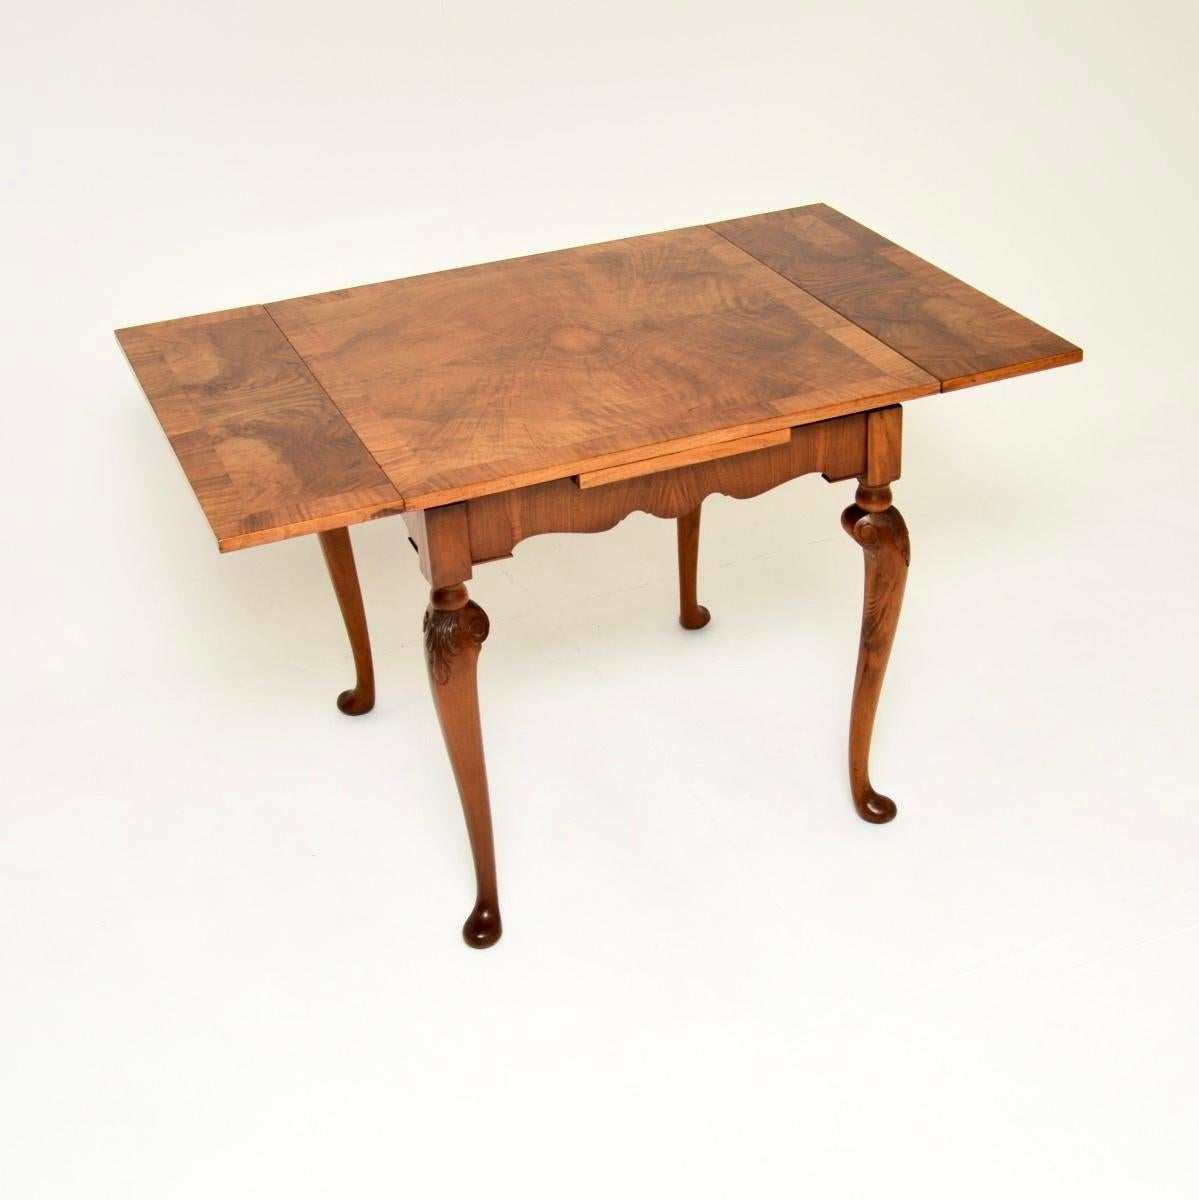 A fantastic antique figured walnut draw leaf dining table, made in England and dating from around the 1920’s.

This is of extremely fine quality and is a lovely size. There are two leaves stored beneath the top that slide out to turn this from a